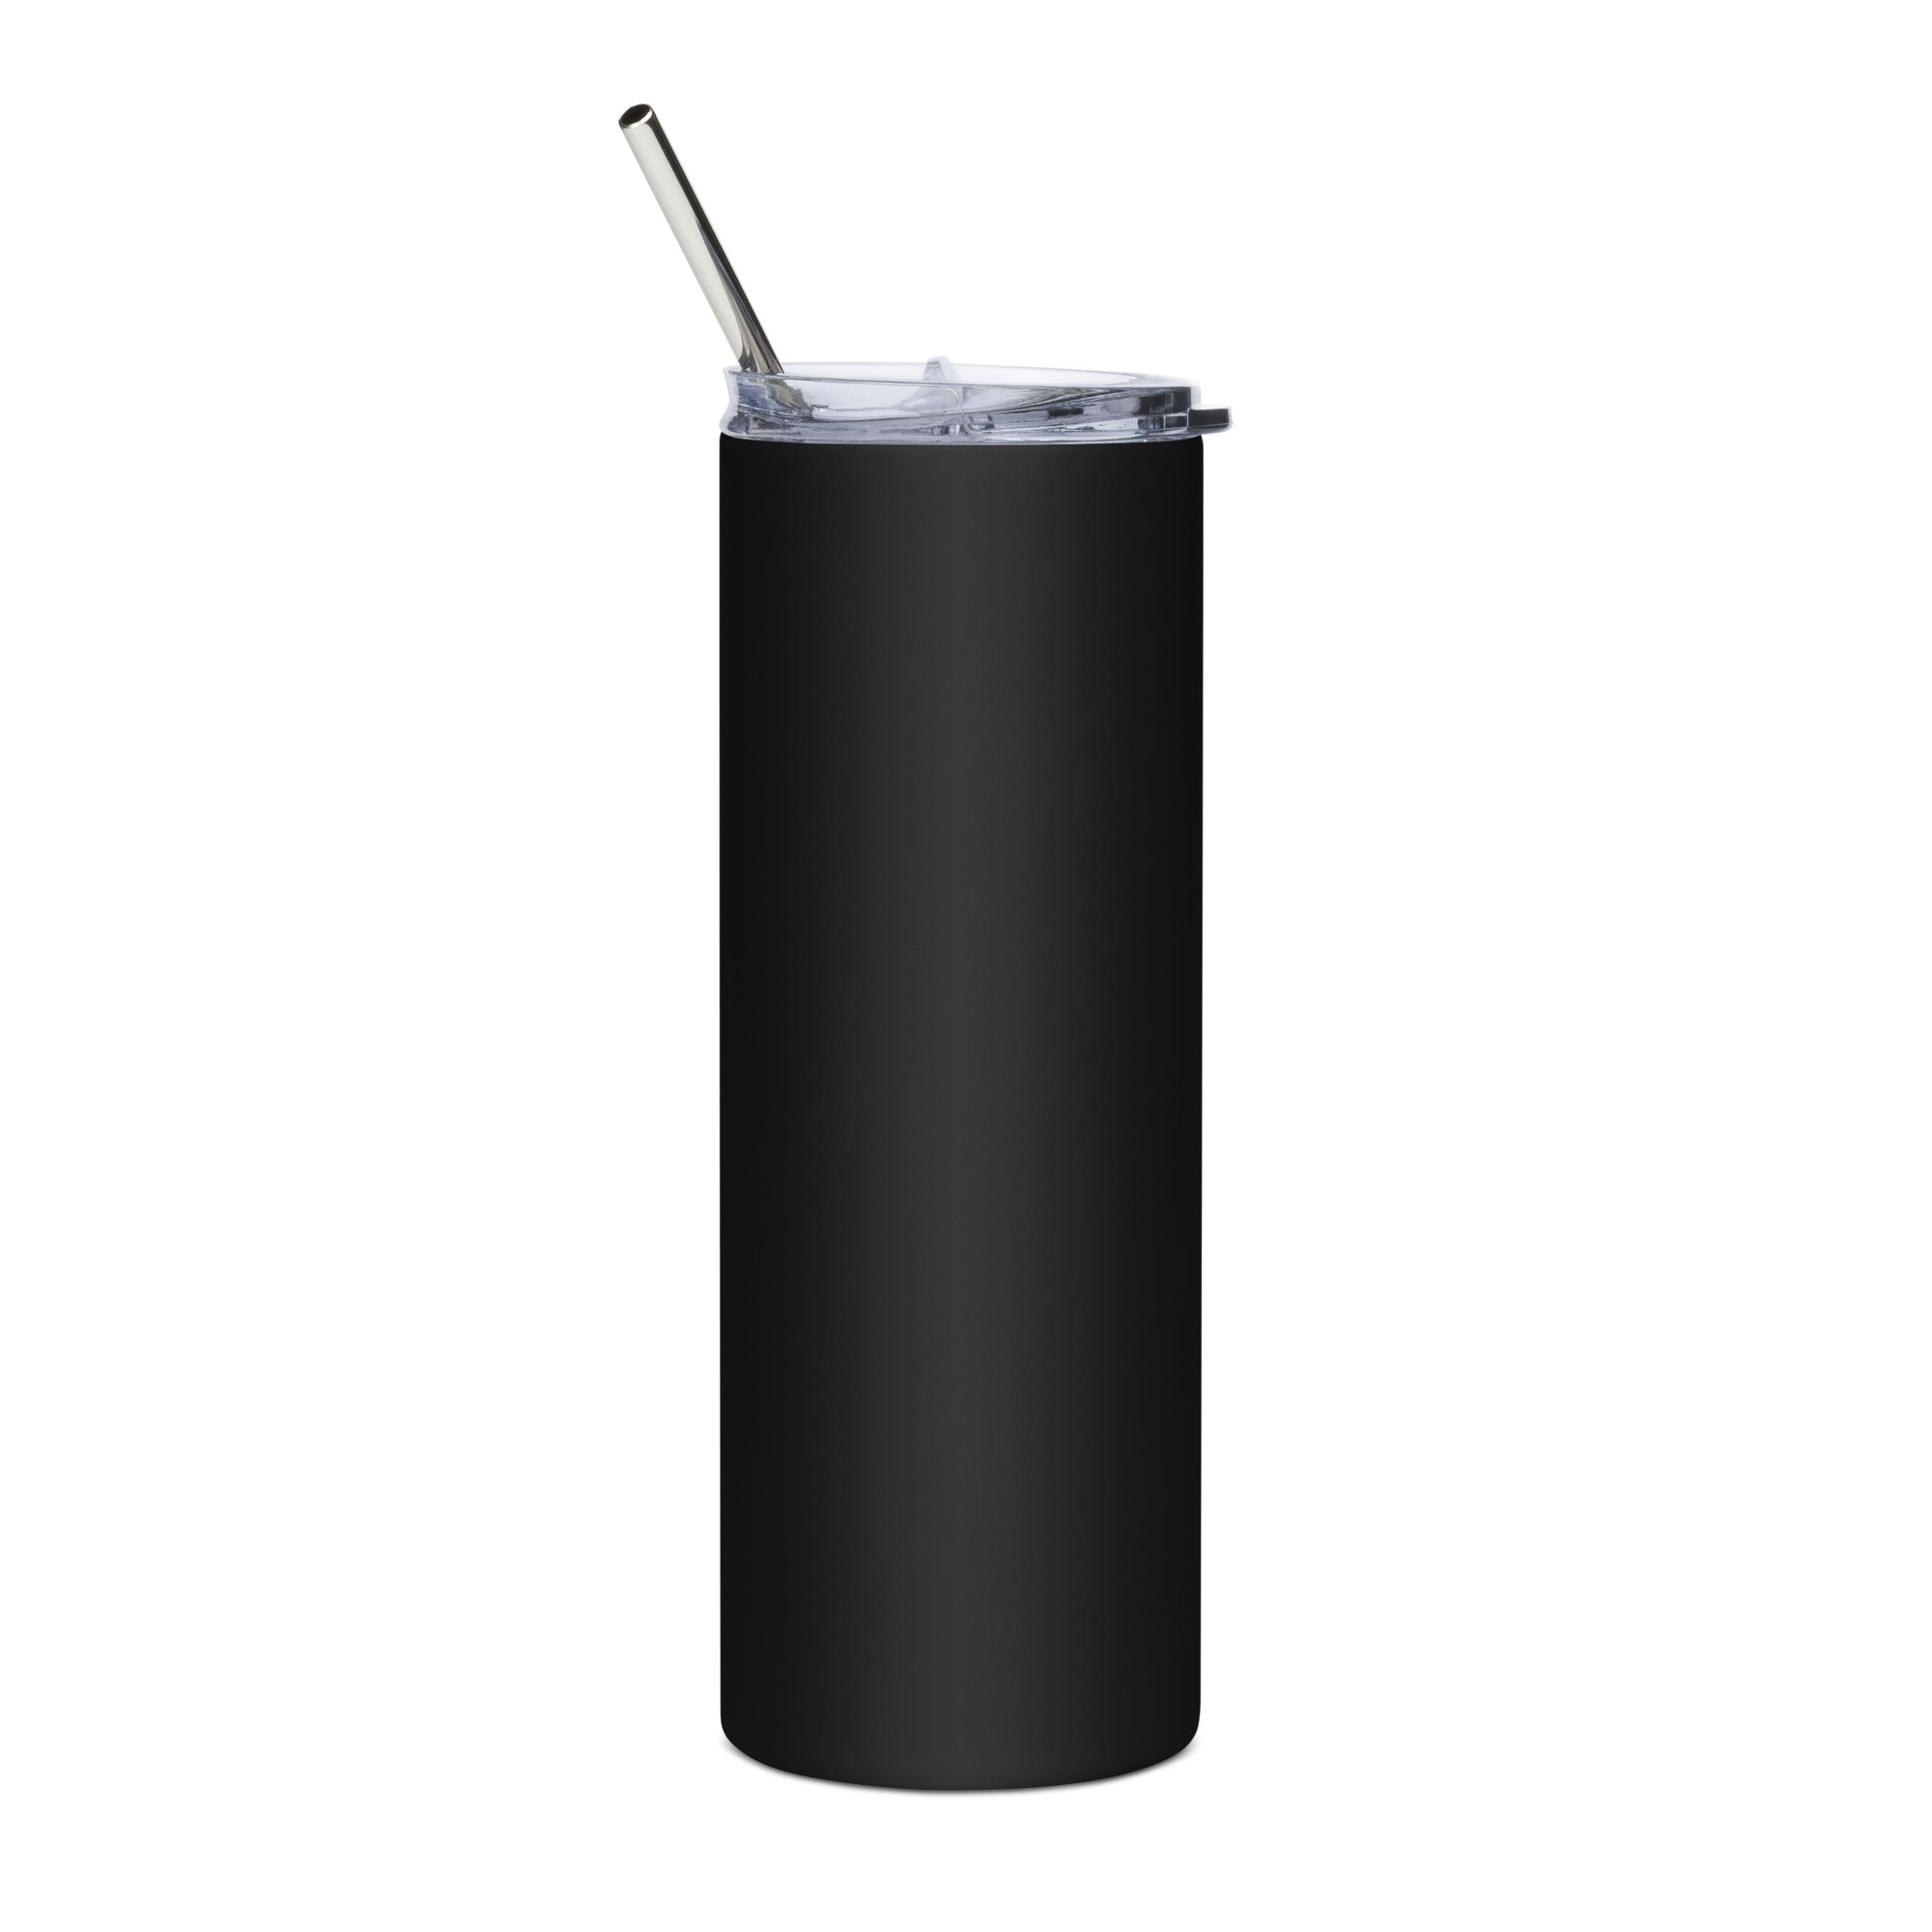 The Pulse: Stainless Tumbler